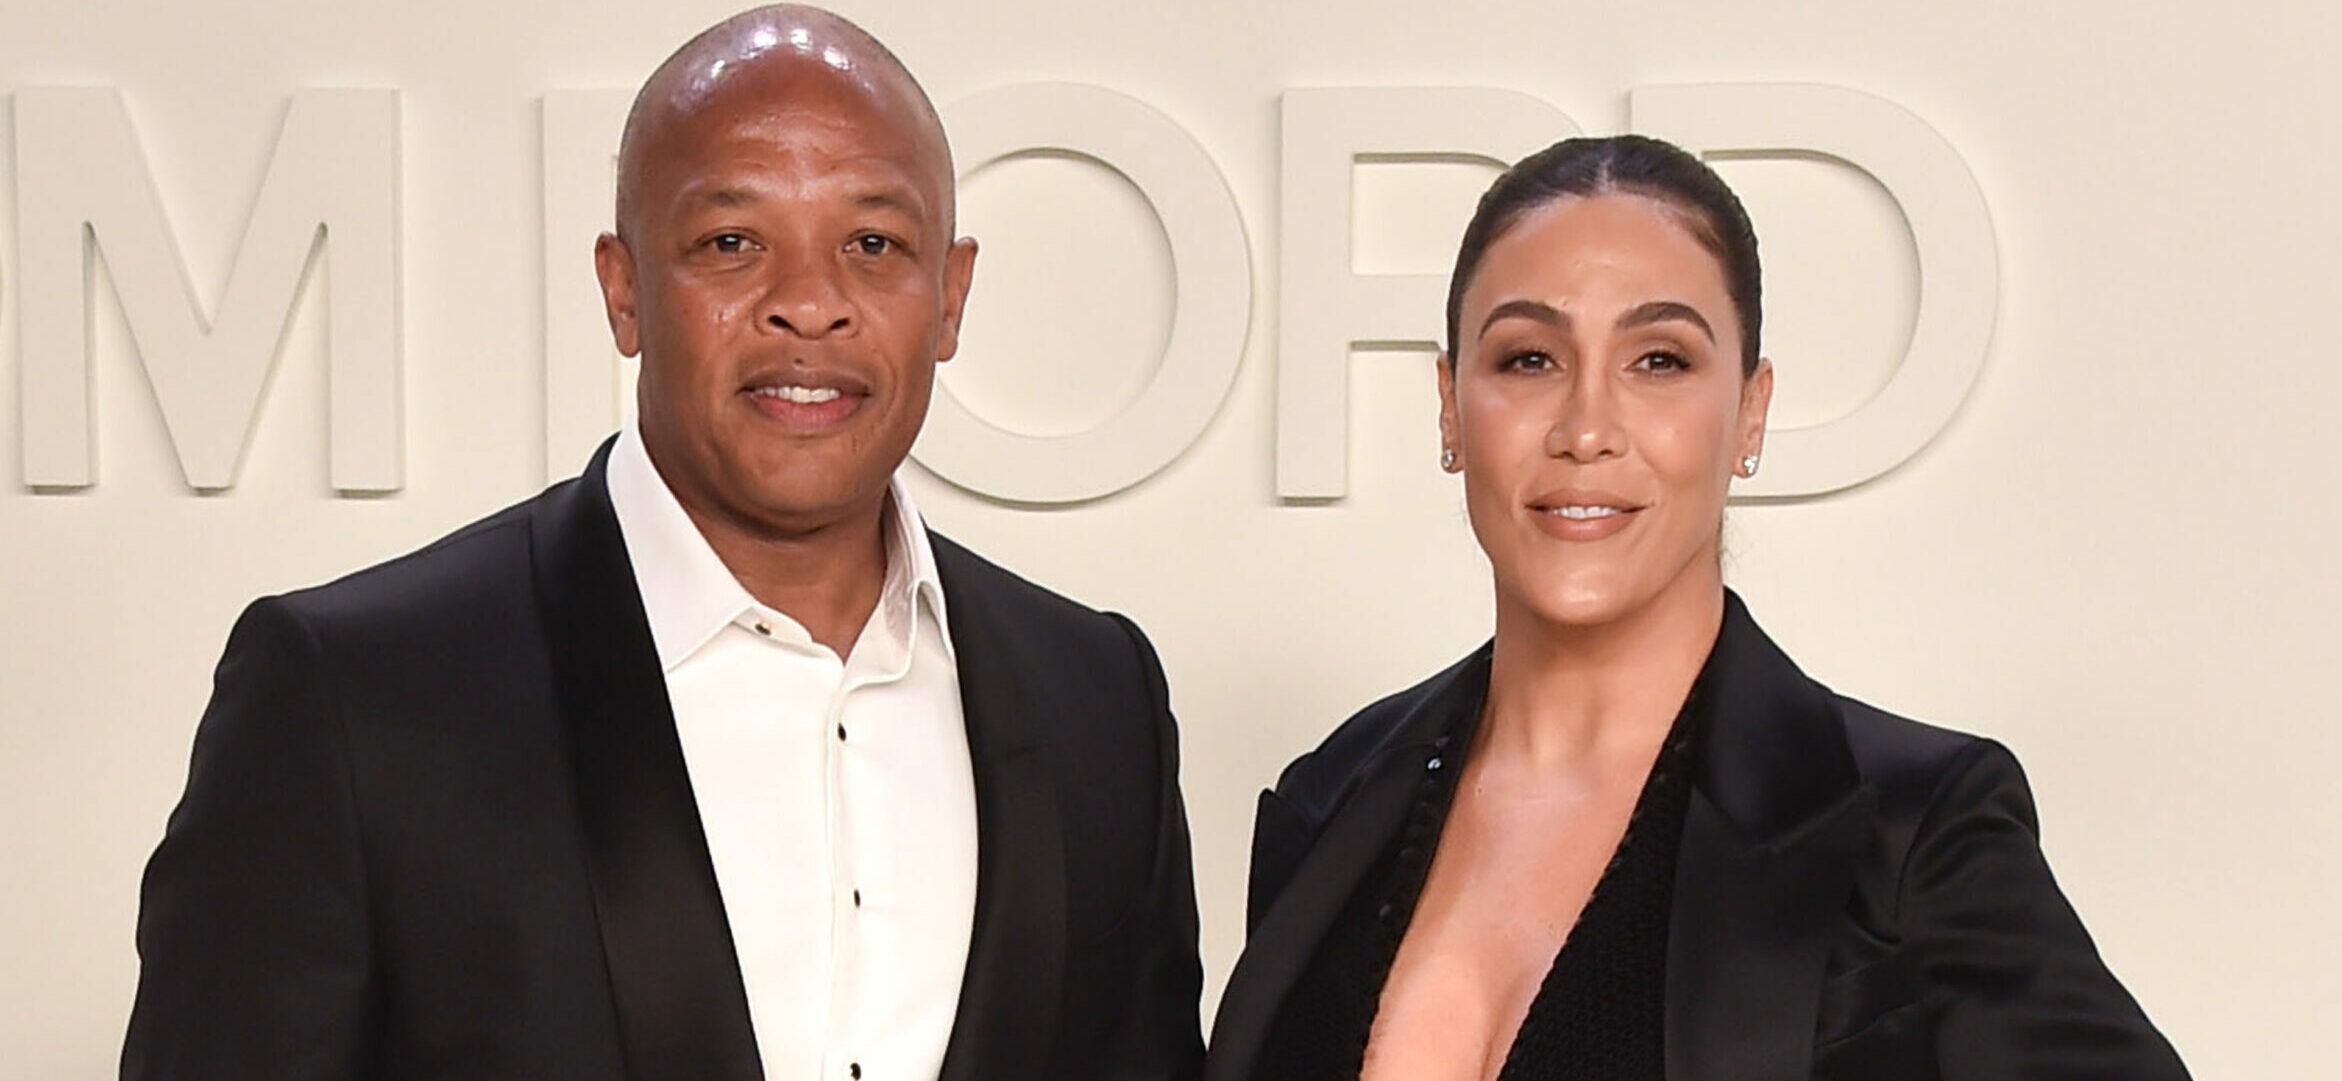 Dr. Dre Reveals Final Text To Ex-Wife, Let’s Keep Divorce ‘Classy And Fair’